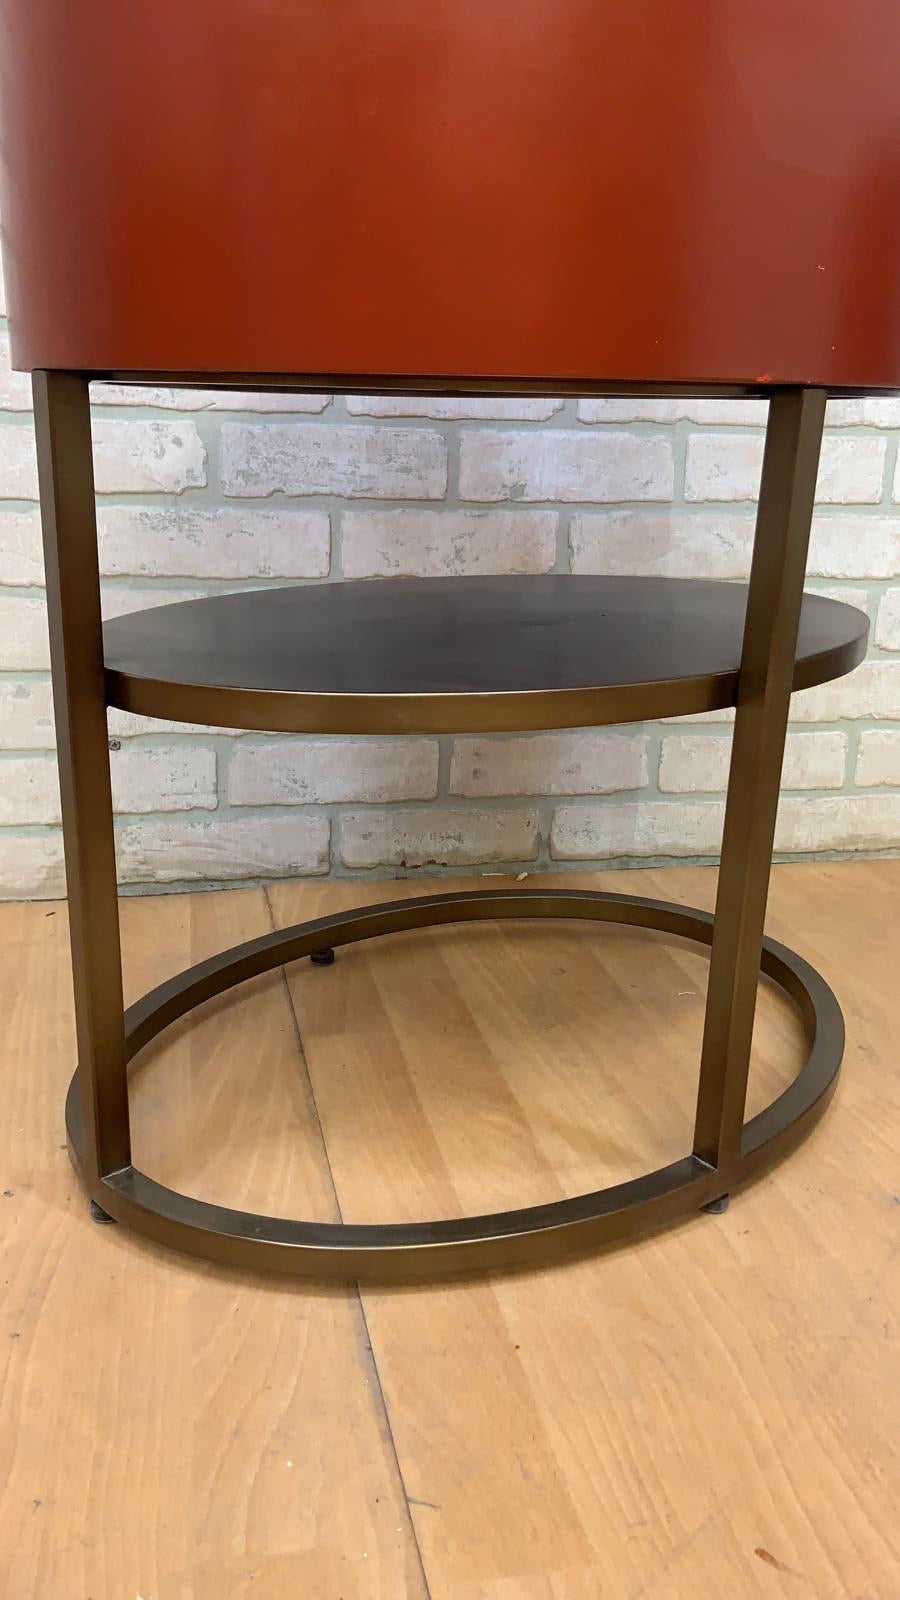 Vintage Contemporary Custom Designed Oval Side Table/Night-Stands - Pair